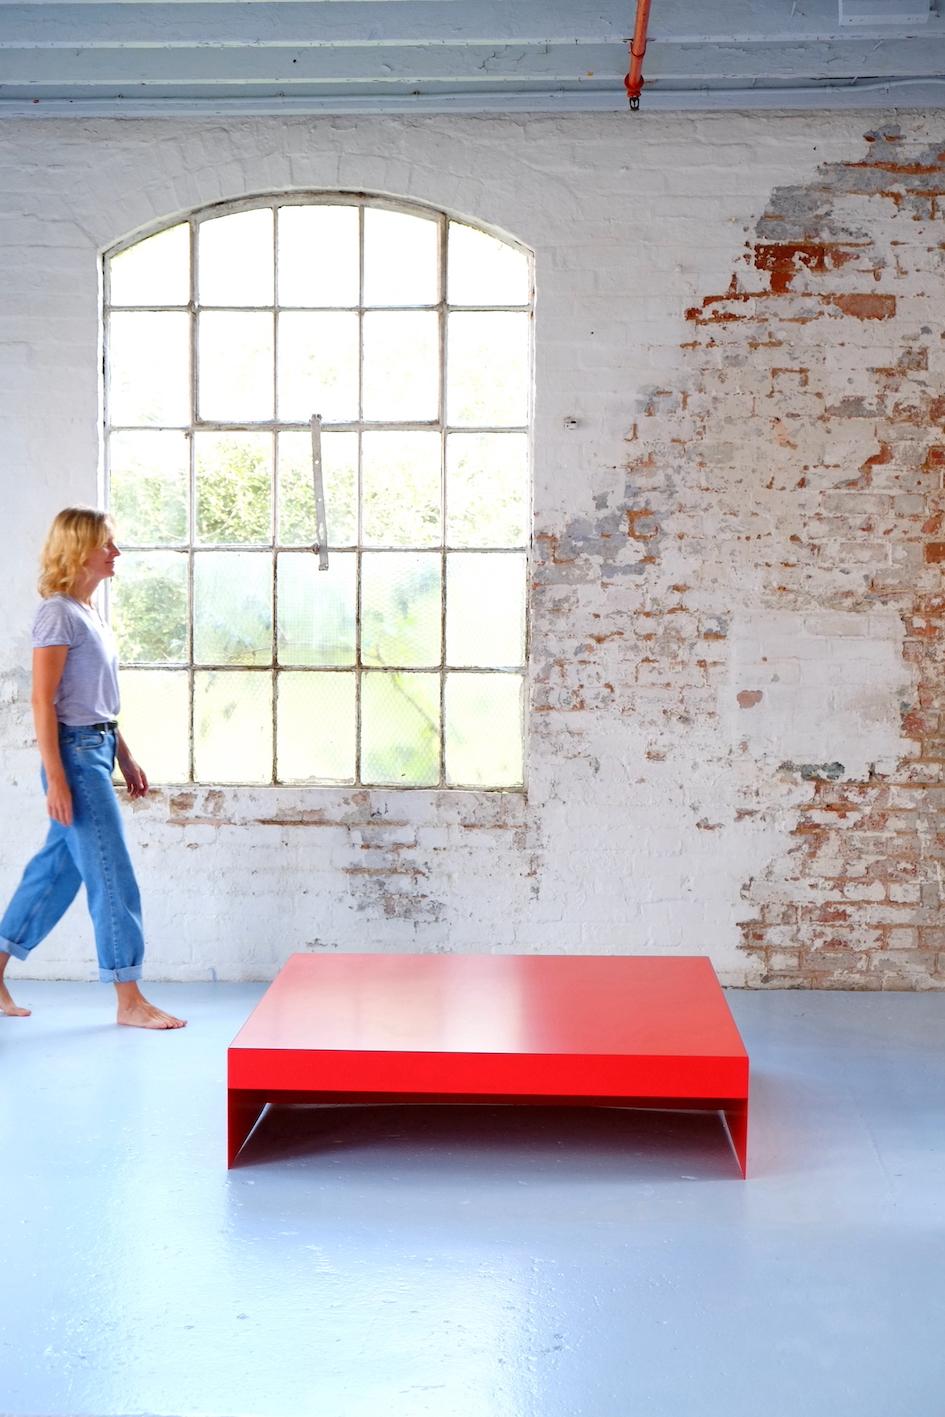 Aluminum Large Rectangular Red Single Form Coffee Table in Aluminium - Customisable For Sale